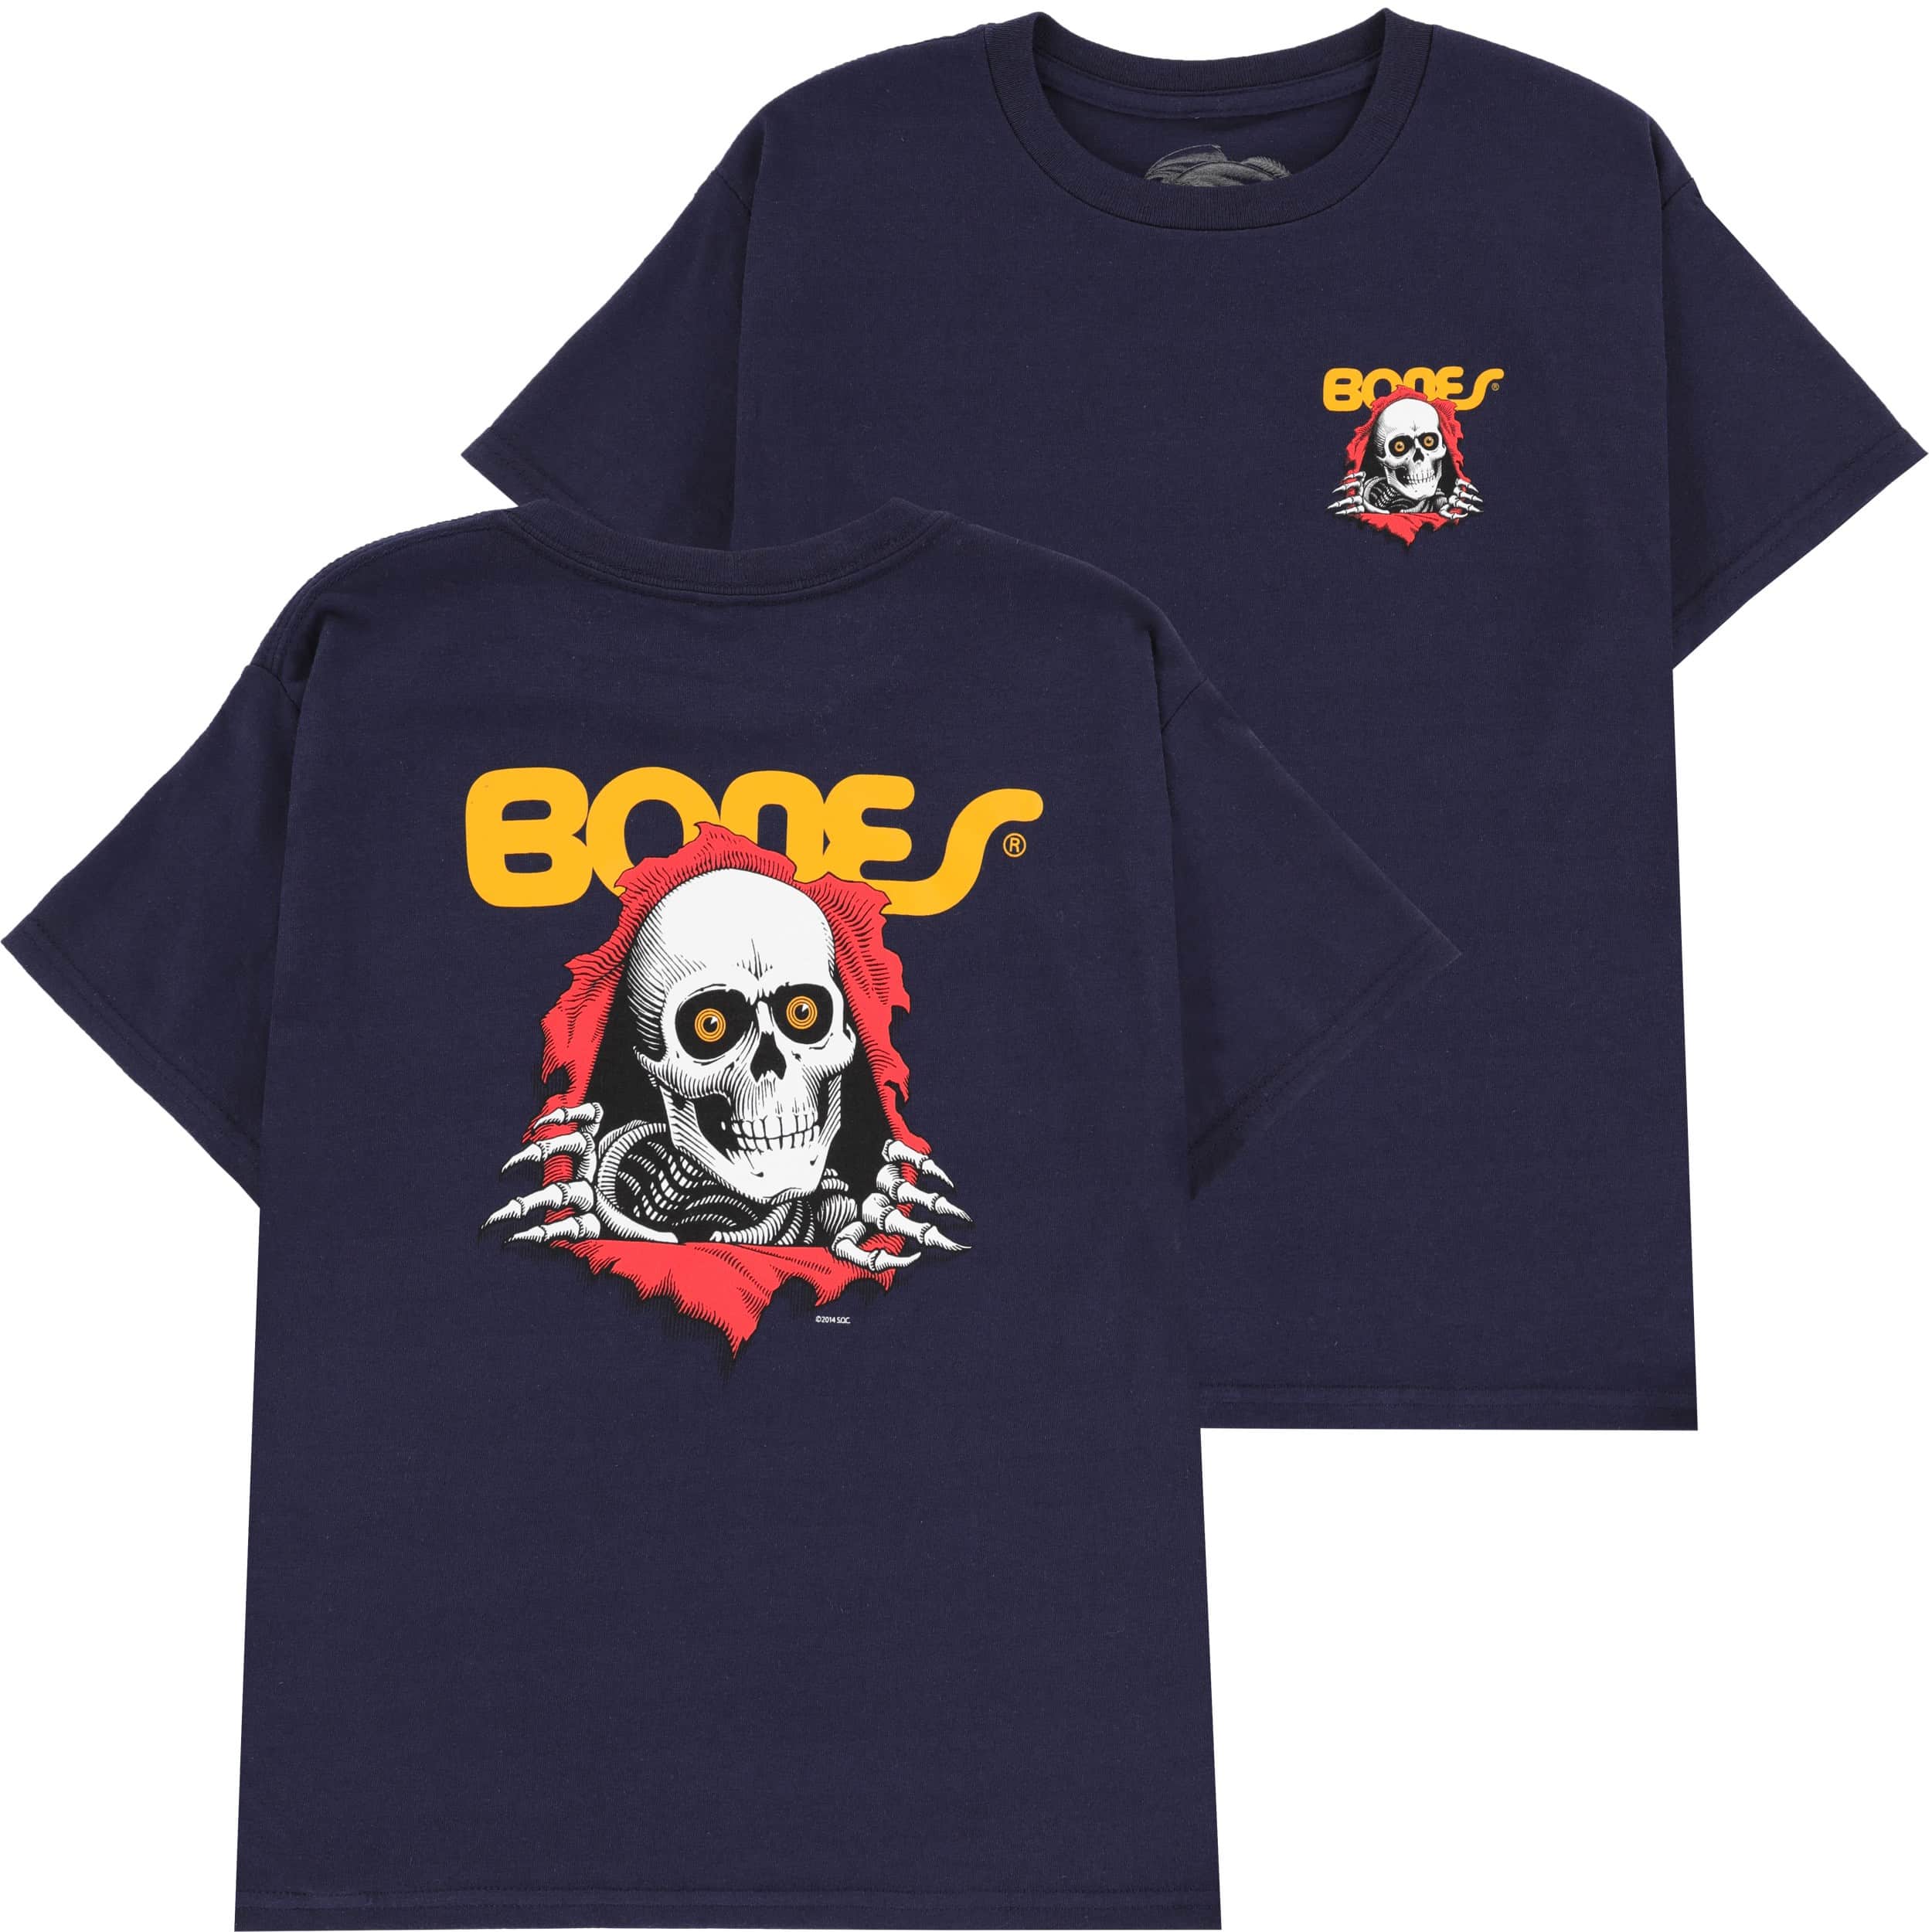 YOUTH RIPPER TEE NAVY